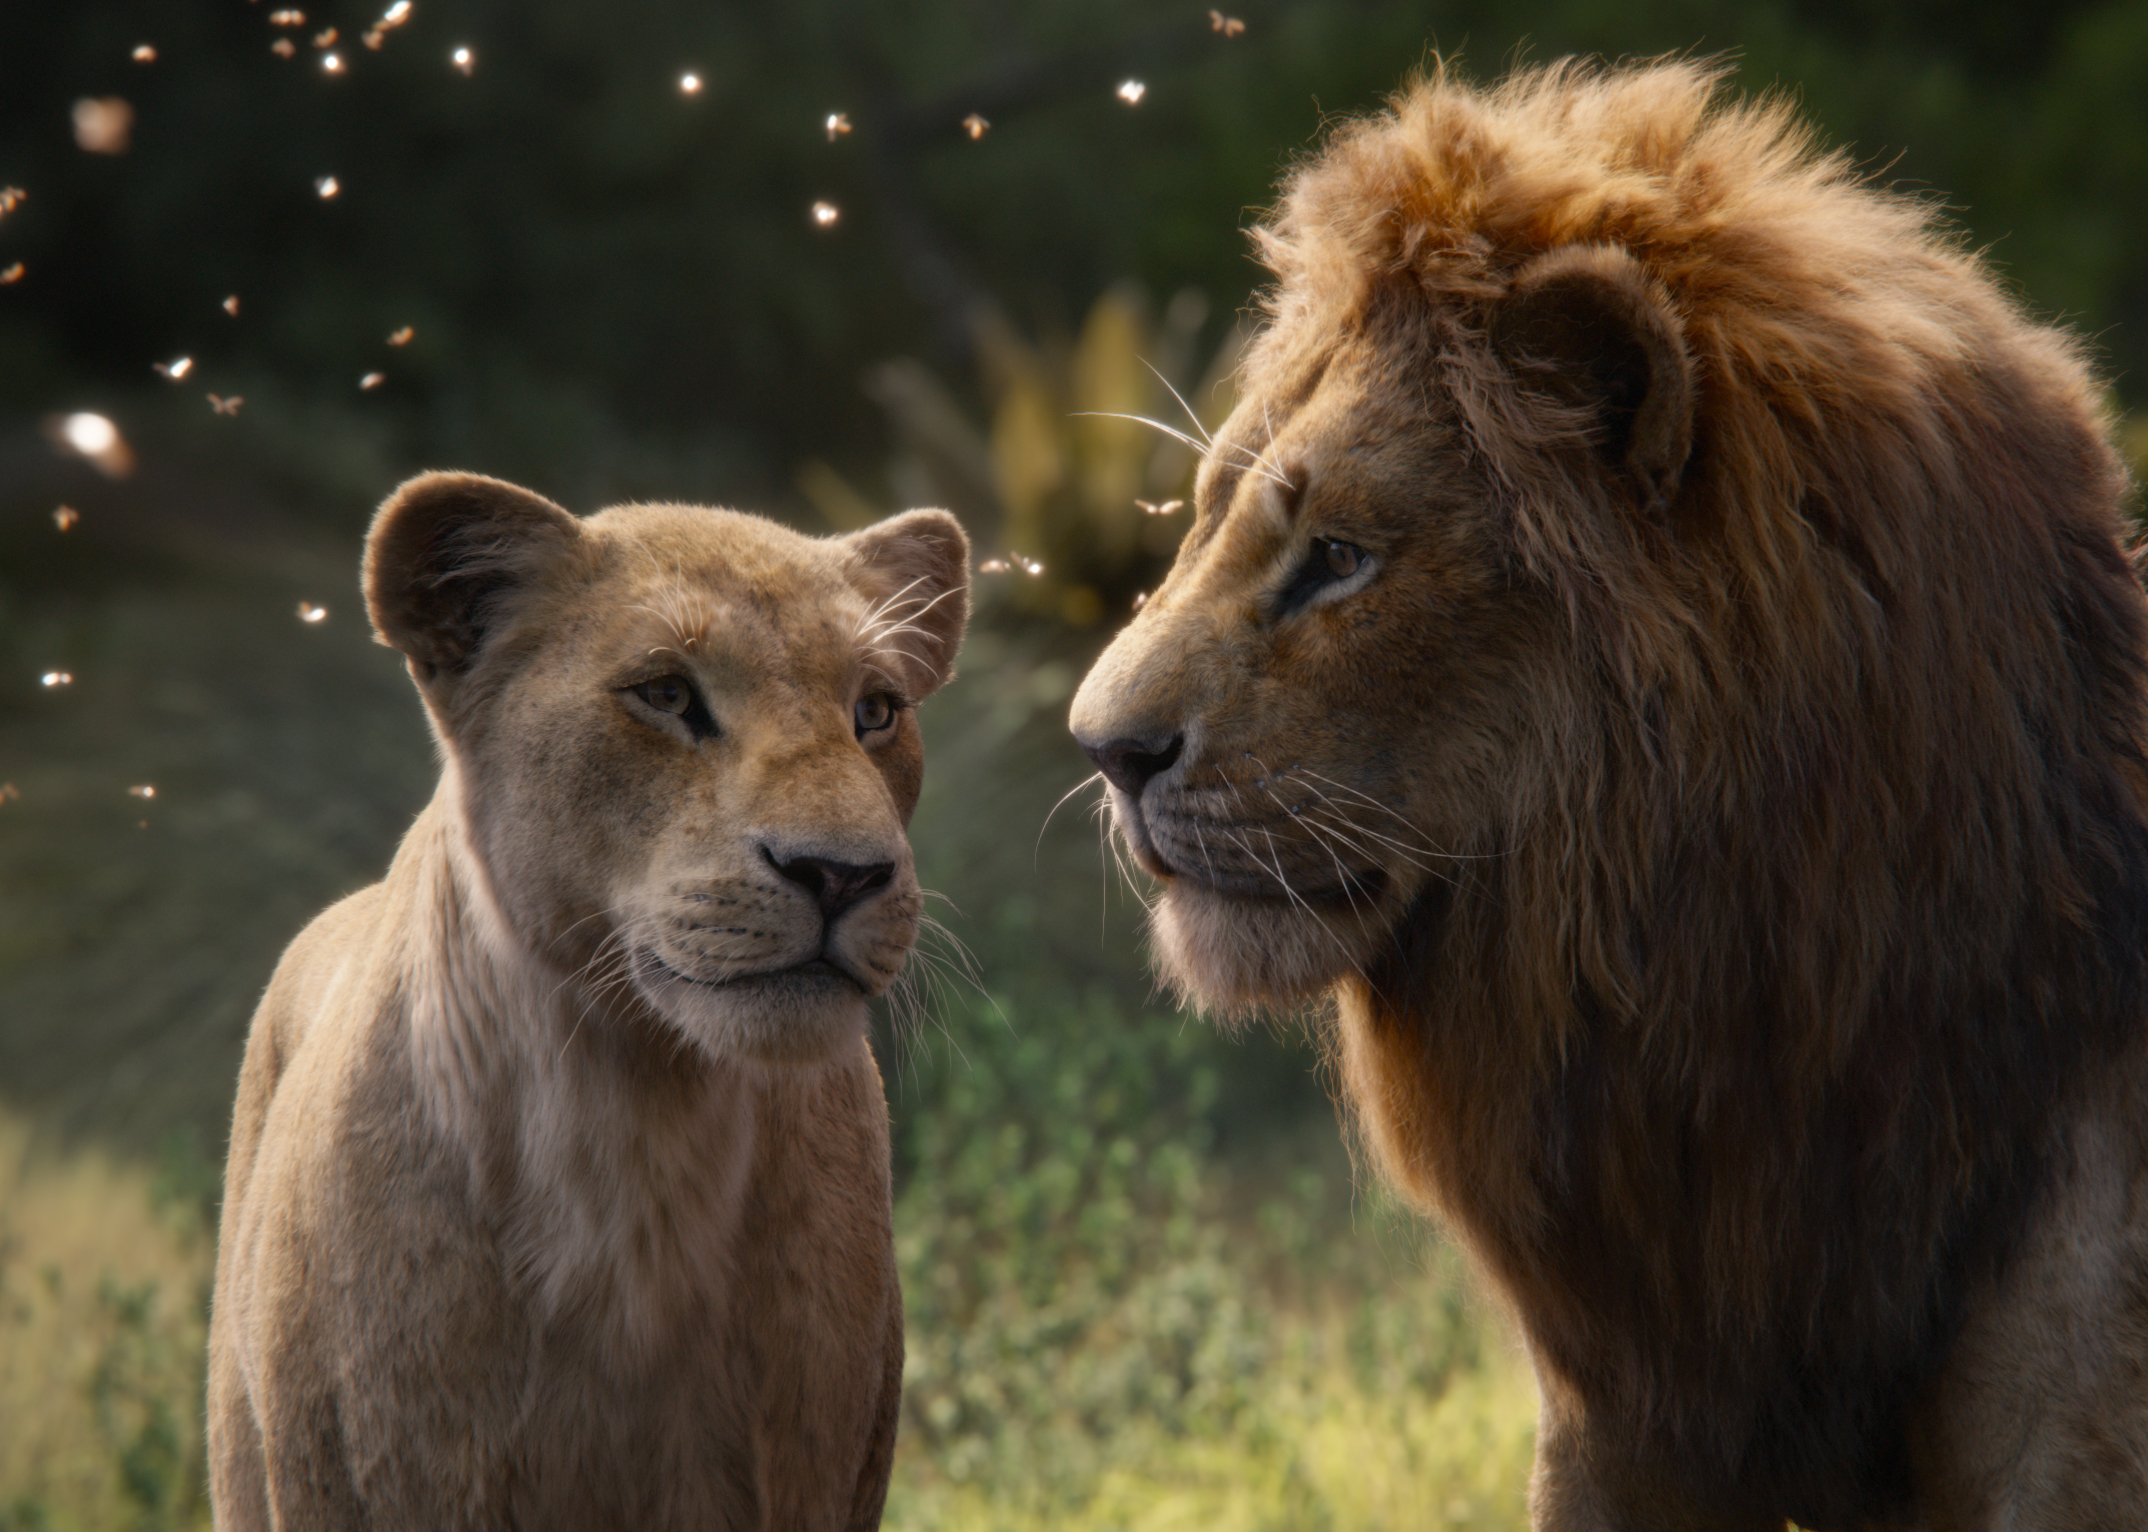 Featuring the voices of Beyoncé Knowles-Carter as Nala and Donald Glover as Simba, Disney’s “The Lion King” is directed by Jon Favreau. (null—©2019 Disney Enterprises, Inc. All Rights Reserved.)